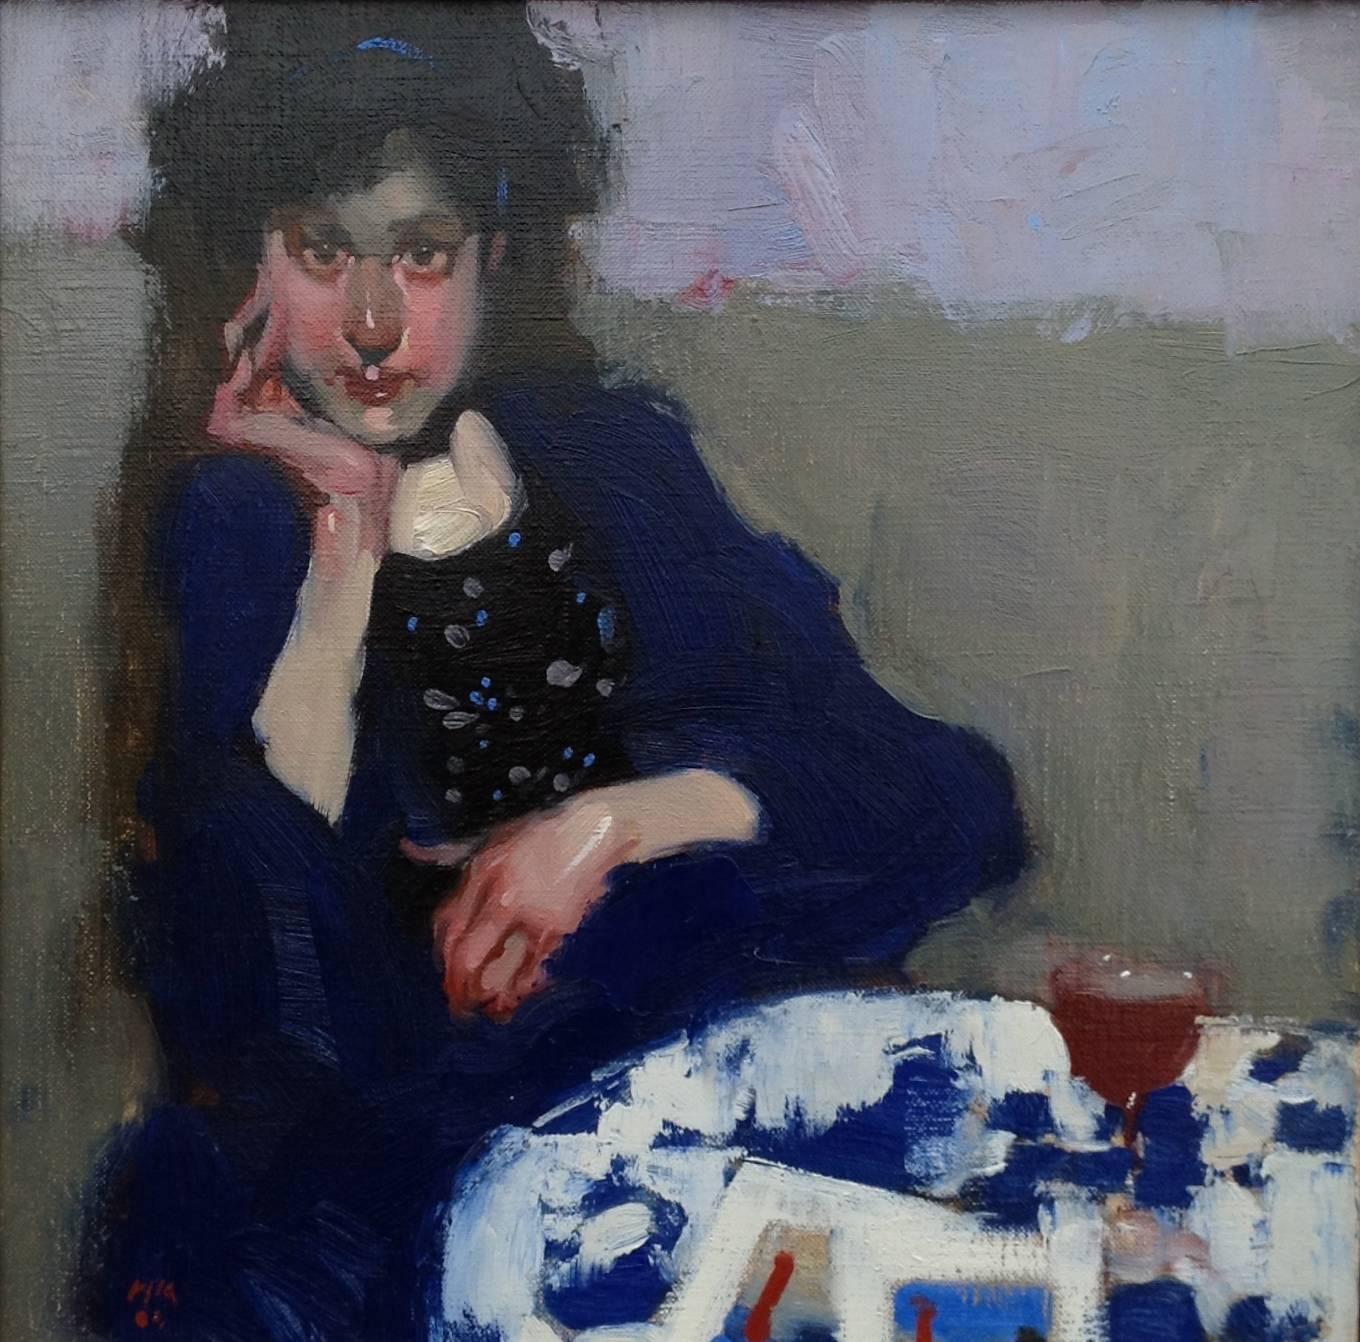 Milt Kobayashi Figurative Painting - "Monique and her Japanese Prints" portrait oil painting of a woman in blue coat 